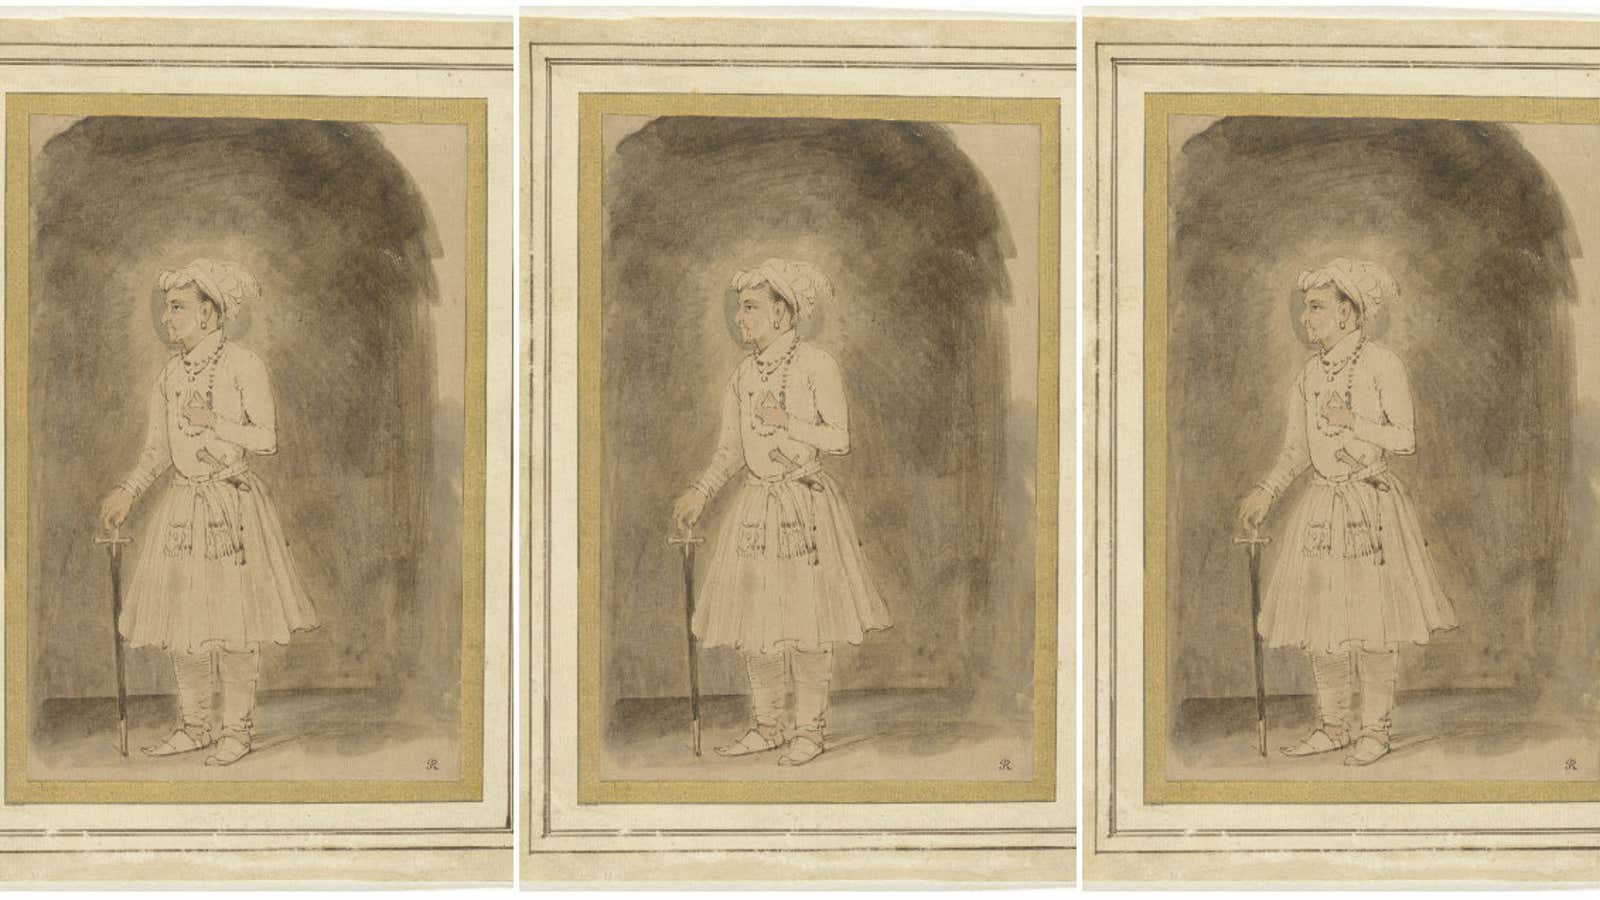 A drawing of the Mughal emperor Jahangir by Dutch painter Rembrandt.